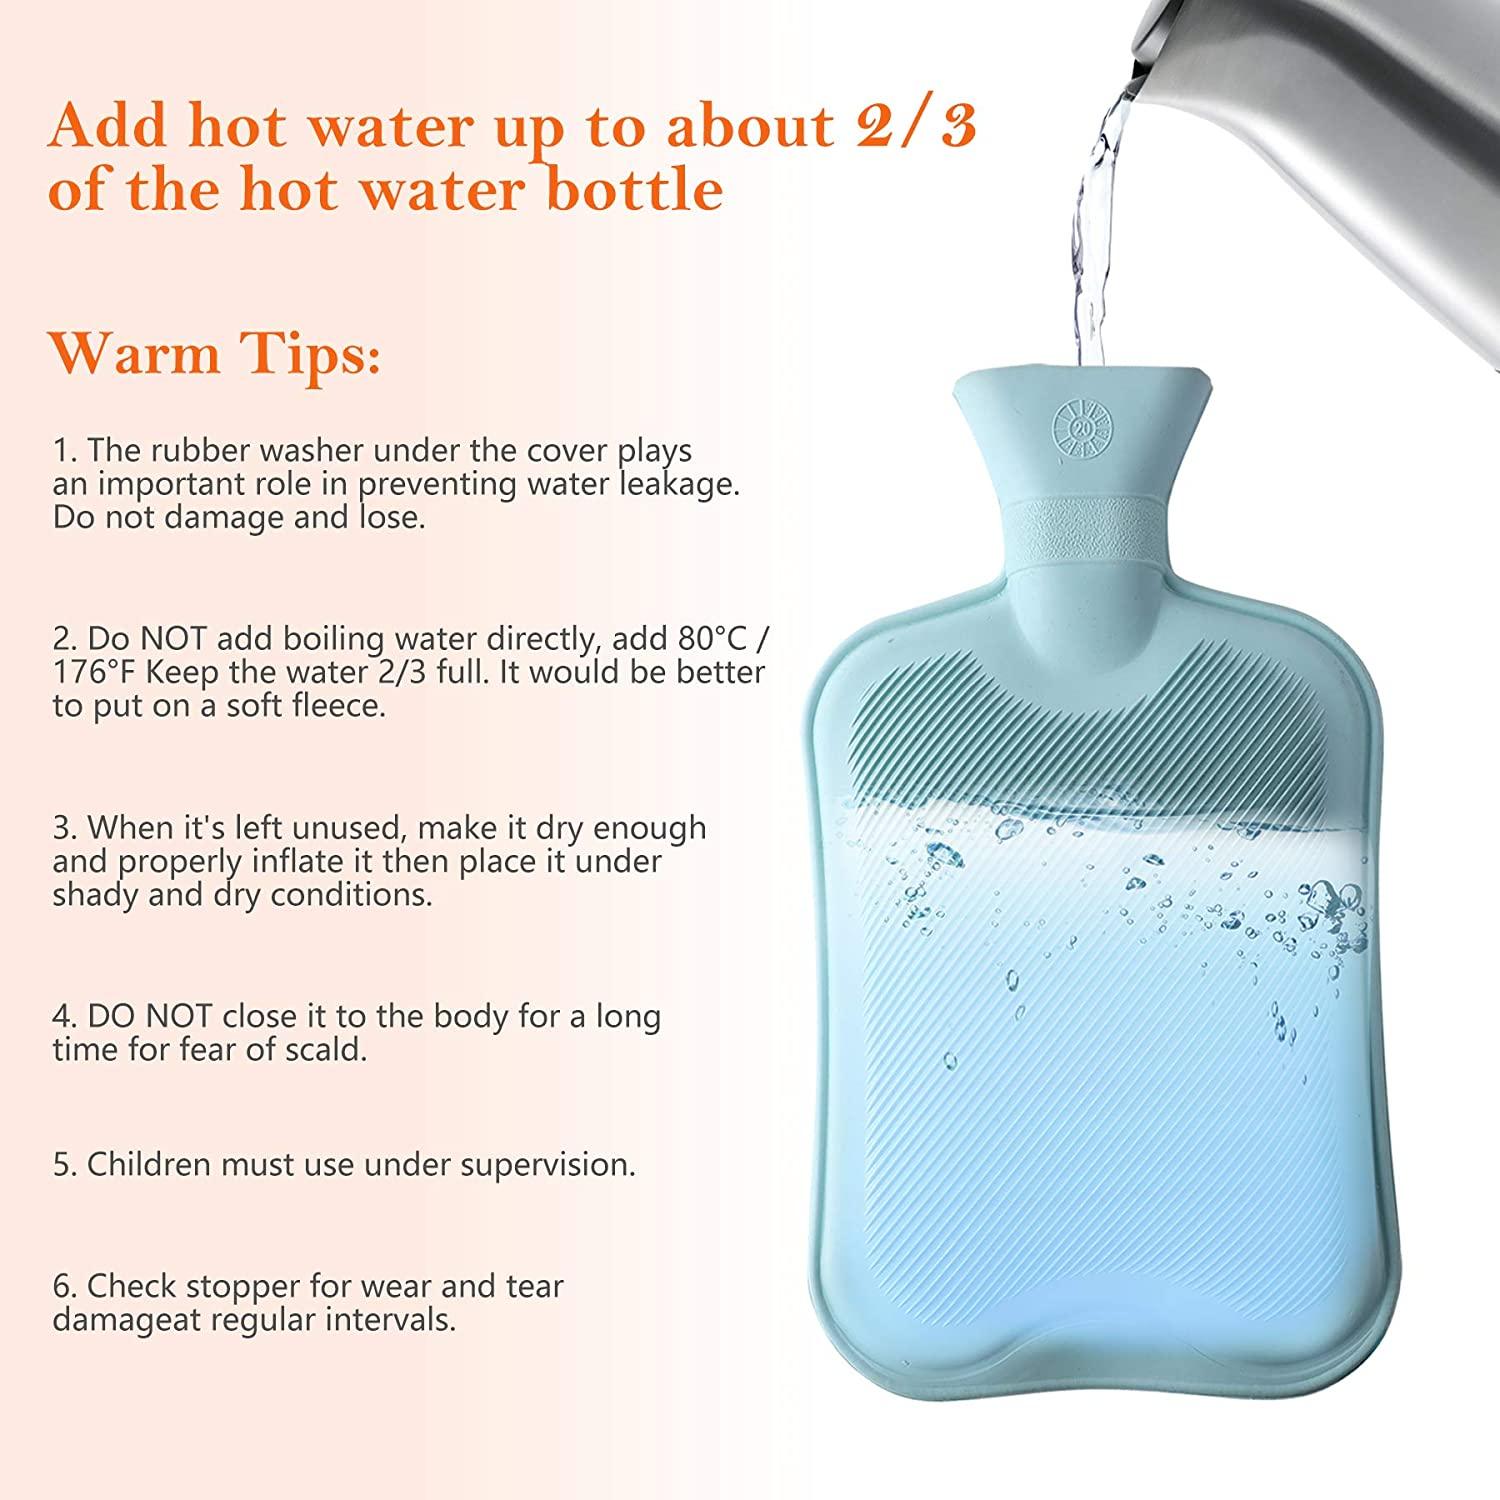 HOT WATER BAGS: HOW TO USE THEM SAFELY